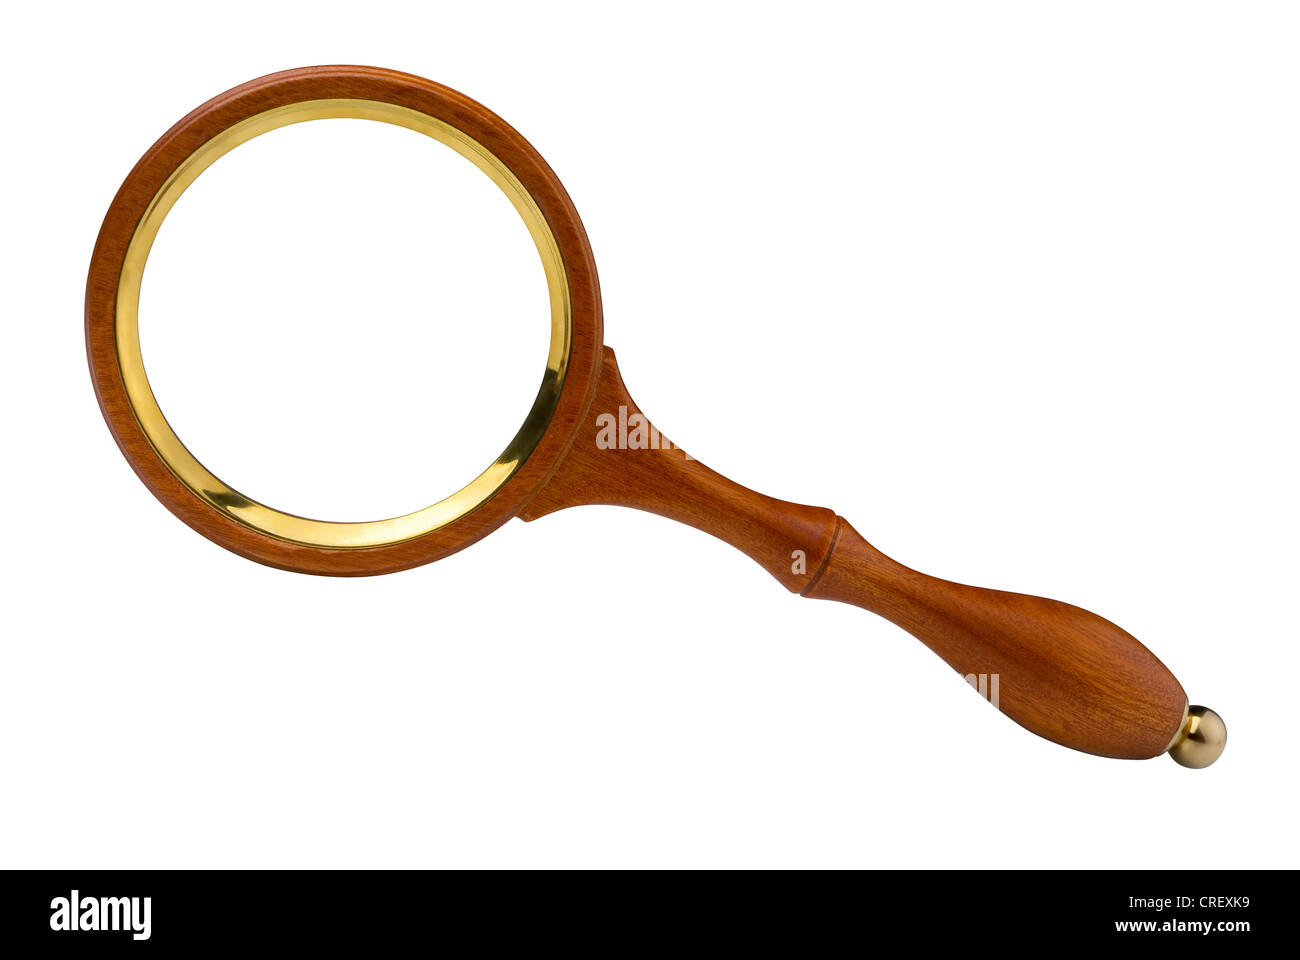 Old magnifying glass with wooden handle isolated on white Stock Photo